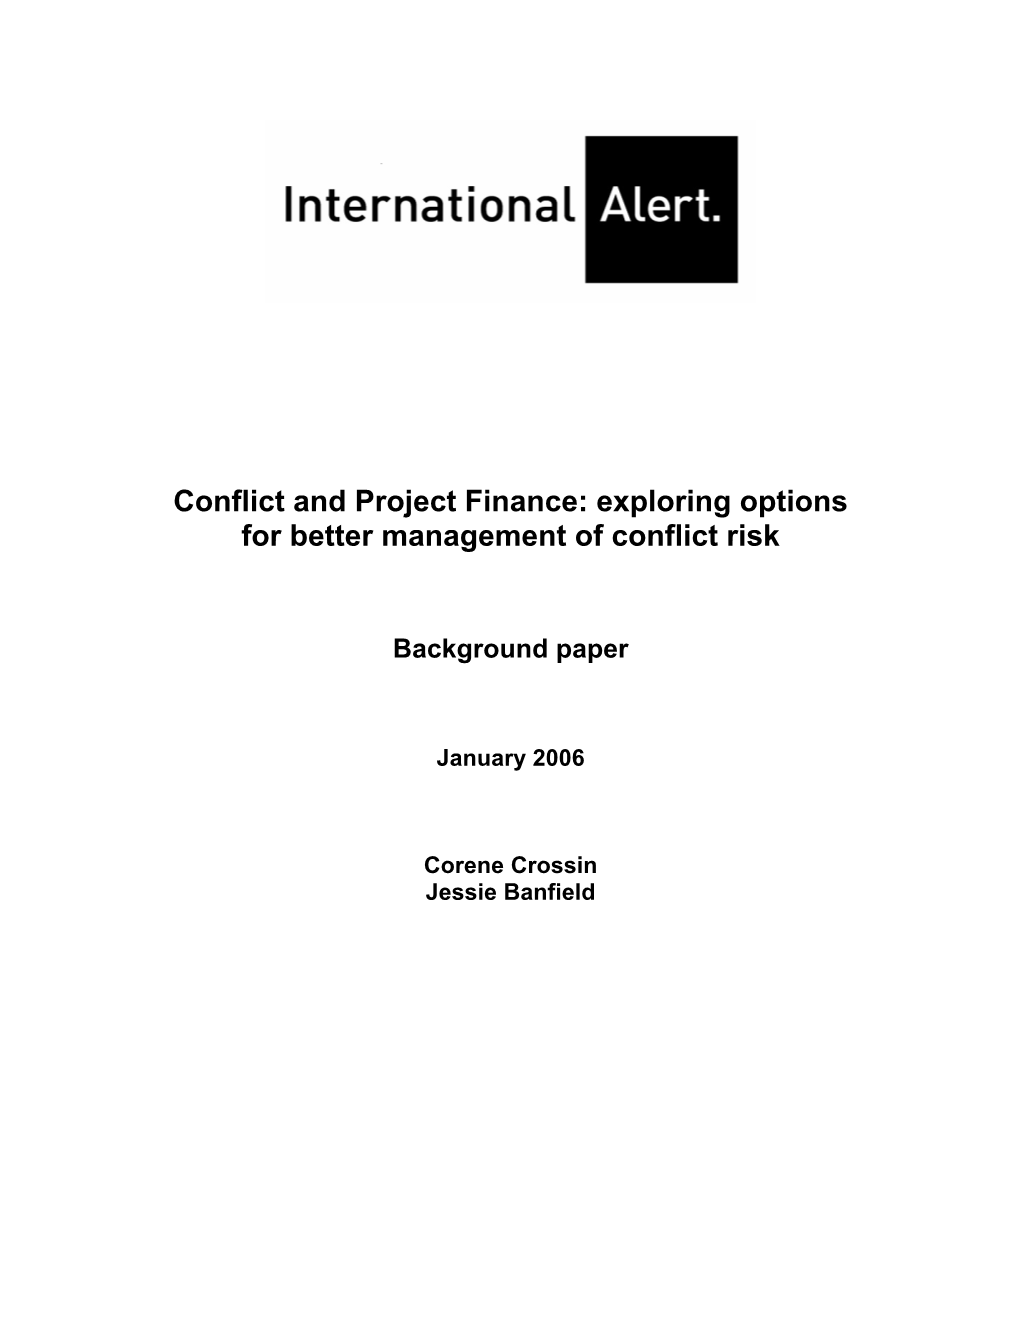 Conflict and Project Finance: Exploring Options for Better Management of Conflict Risk